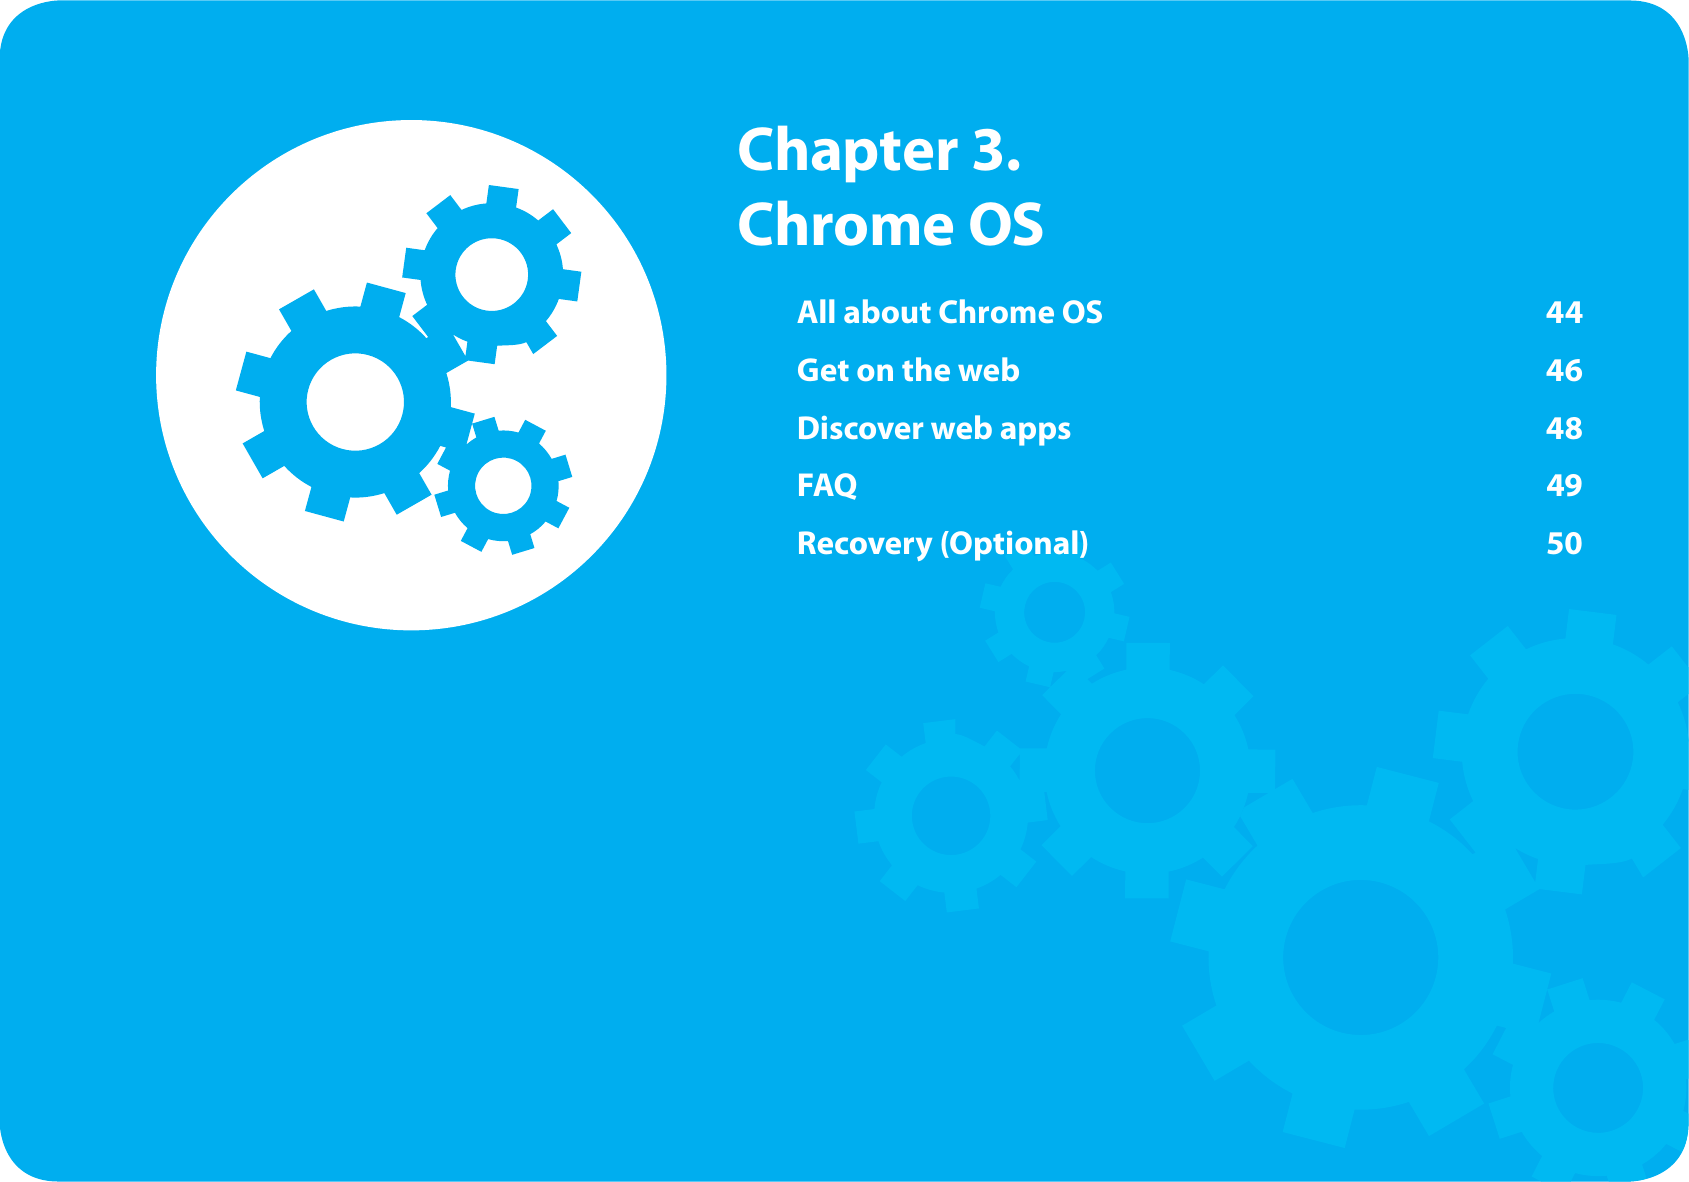 All about Chrome OS  44Get on the web  46Discover web apps  48FAQ 49Recovery (Optional)  50  Chapter  3. Chrome OS